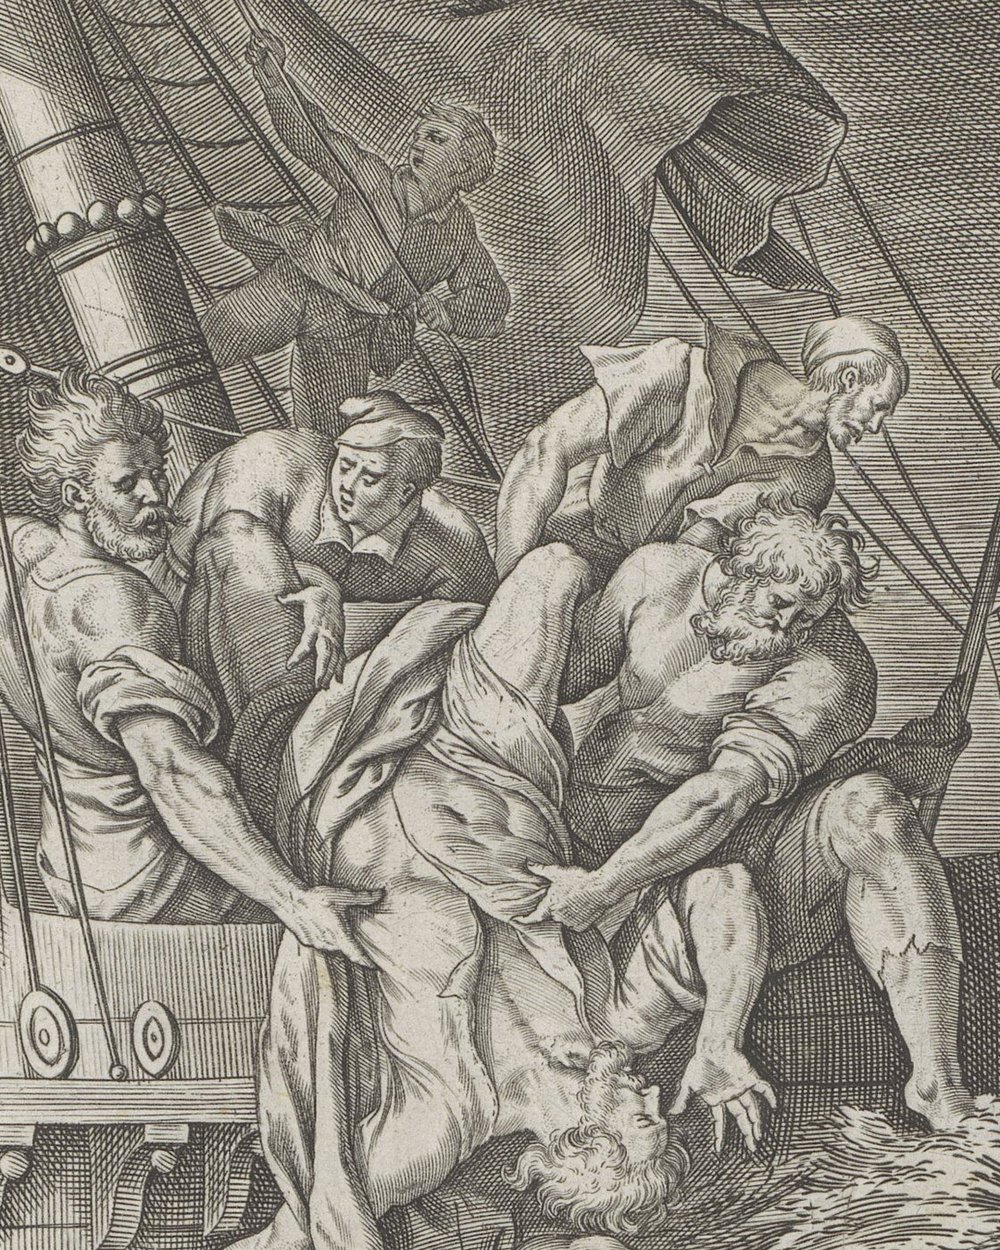 ''Jonah is thrown into the sea'' (1646)